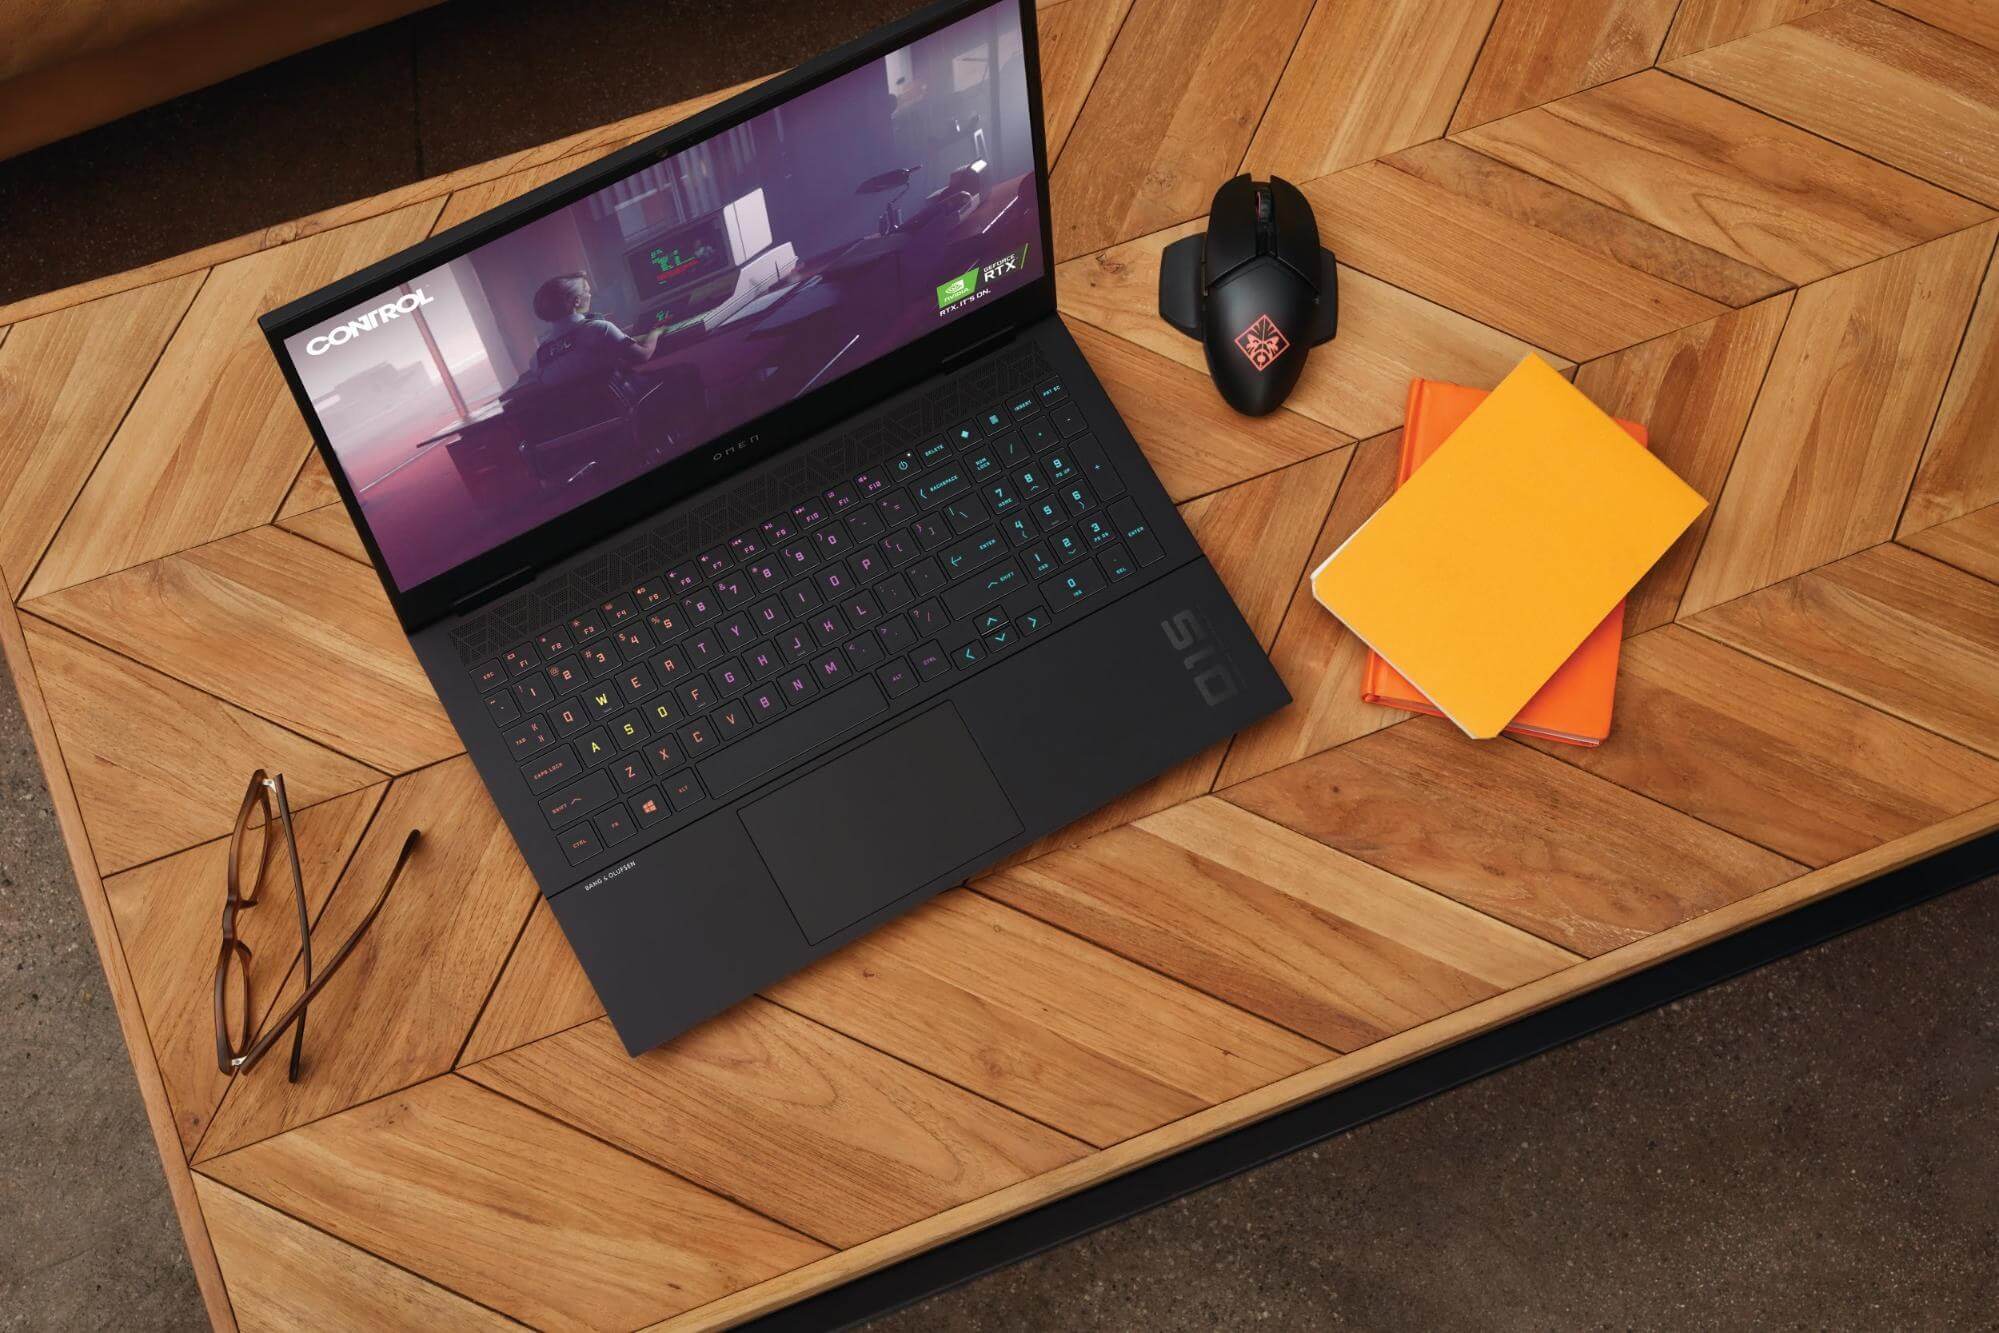 New HP Omen 15 gaming laptops are slimmer, faster, and let you choose between Intel and AMD CPU options